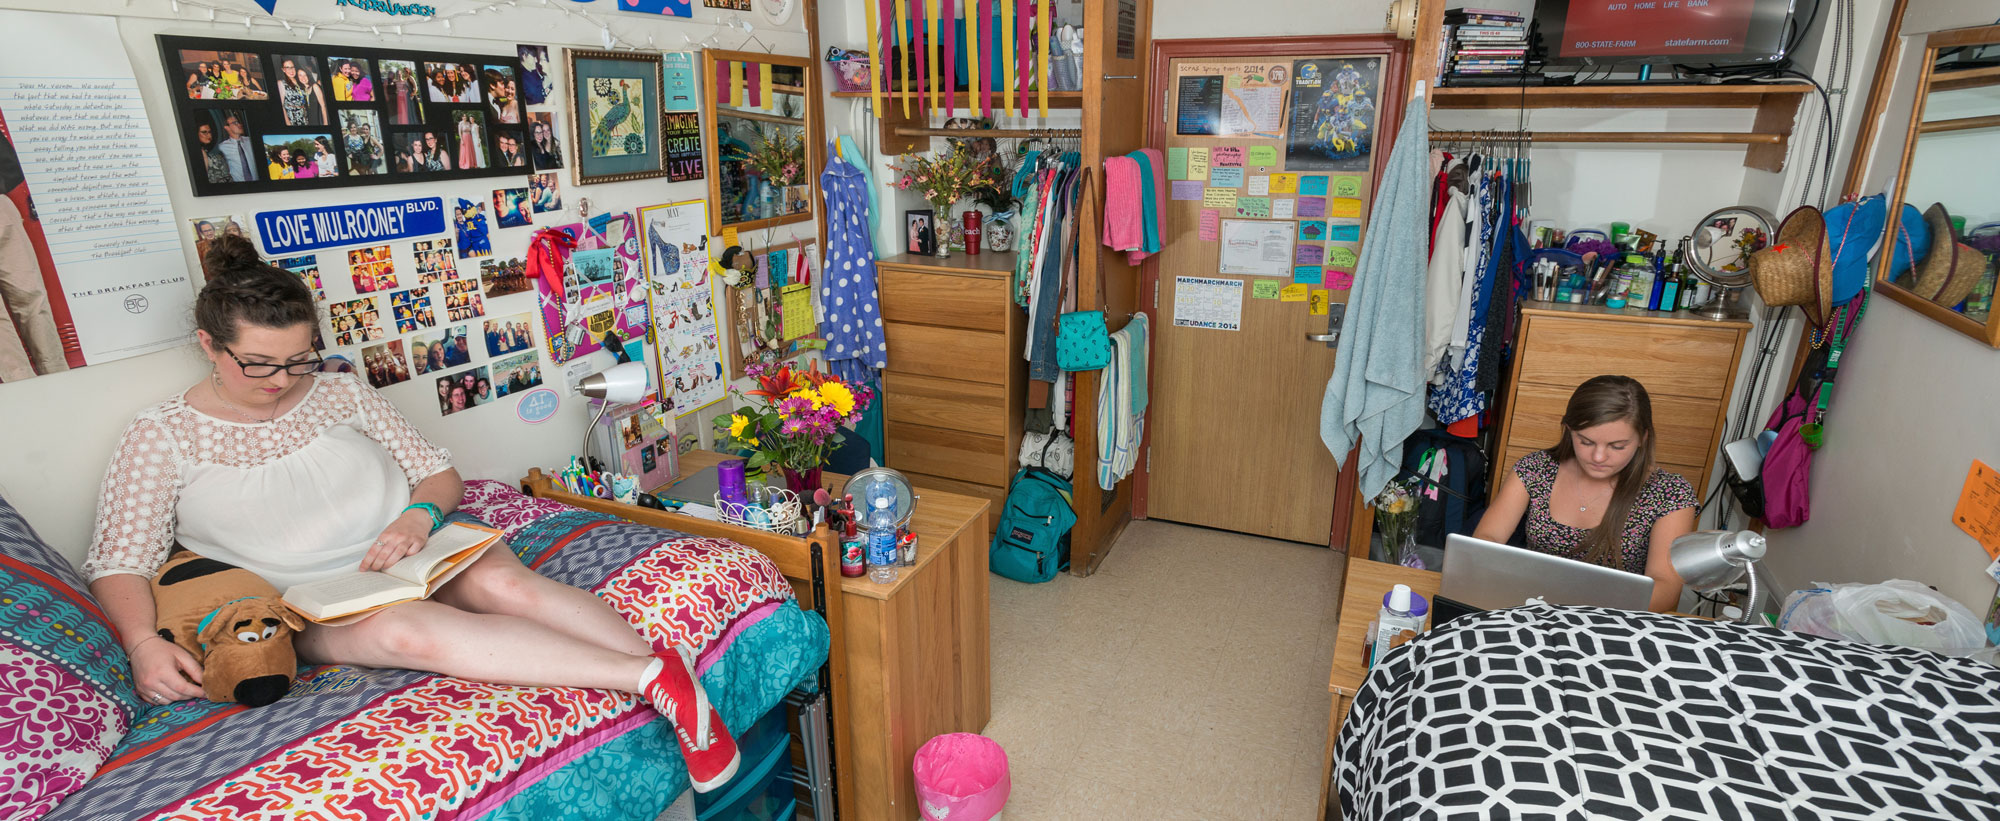 Students studying in a decorated dorm room